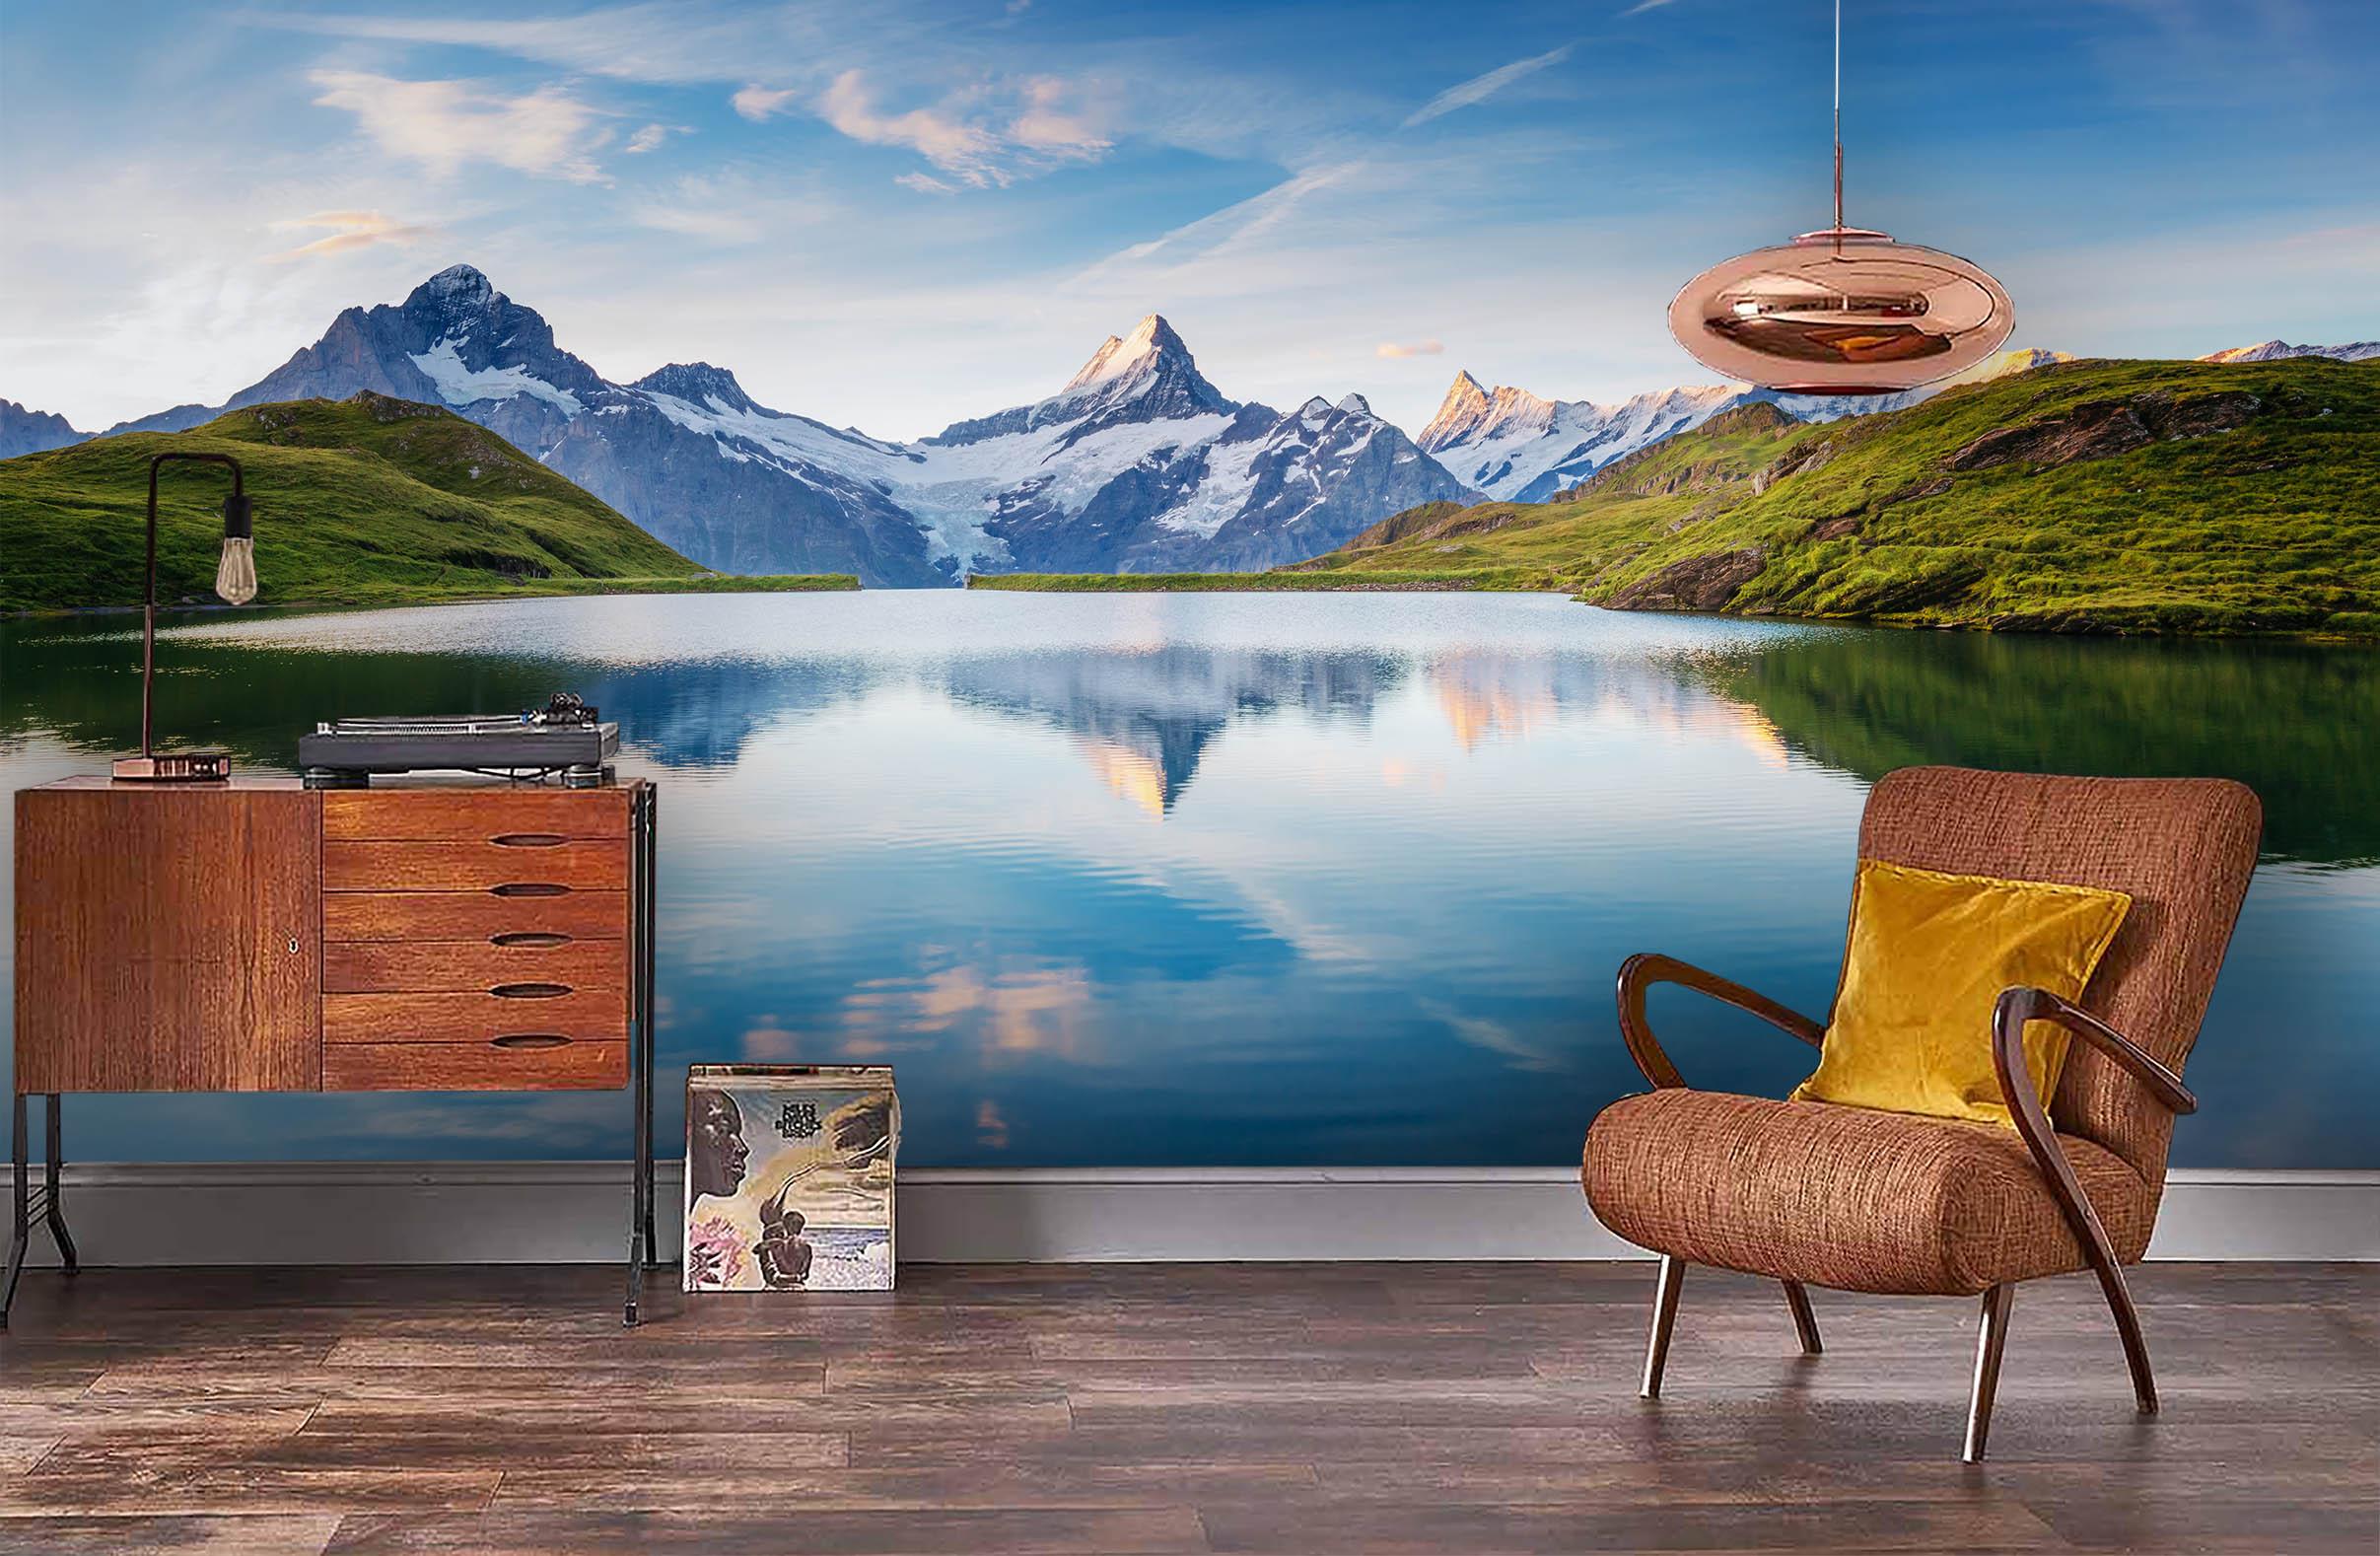 3D Lake And Snow Mountain Wall Mural Wallpaper 14- Jess Art Decoration